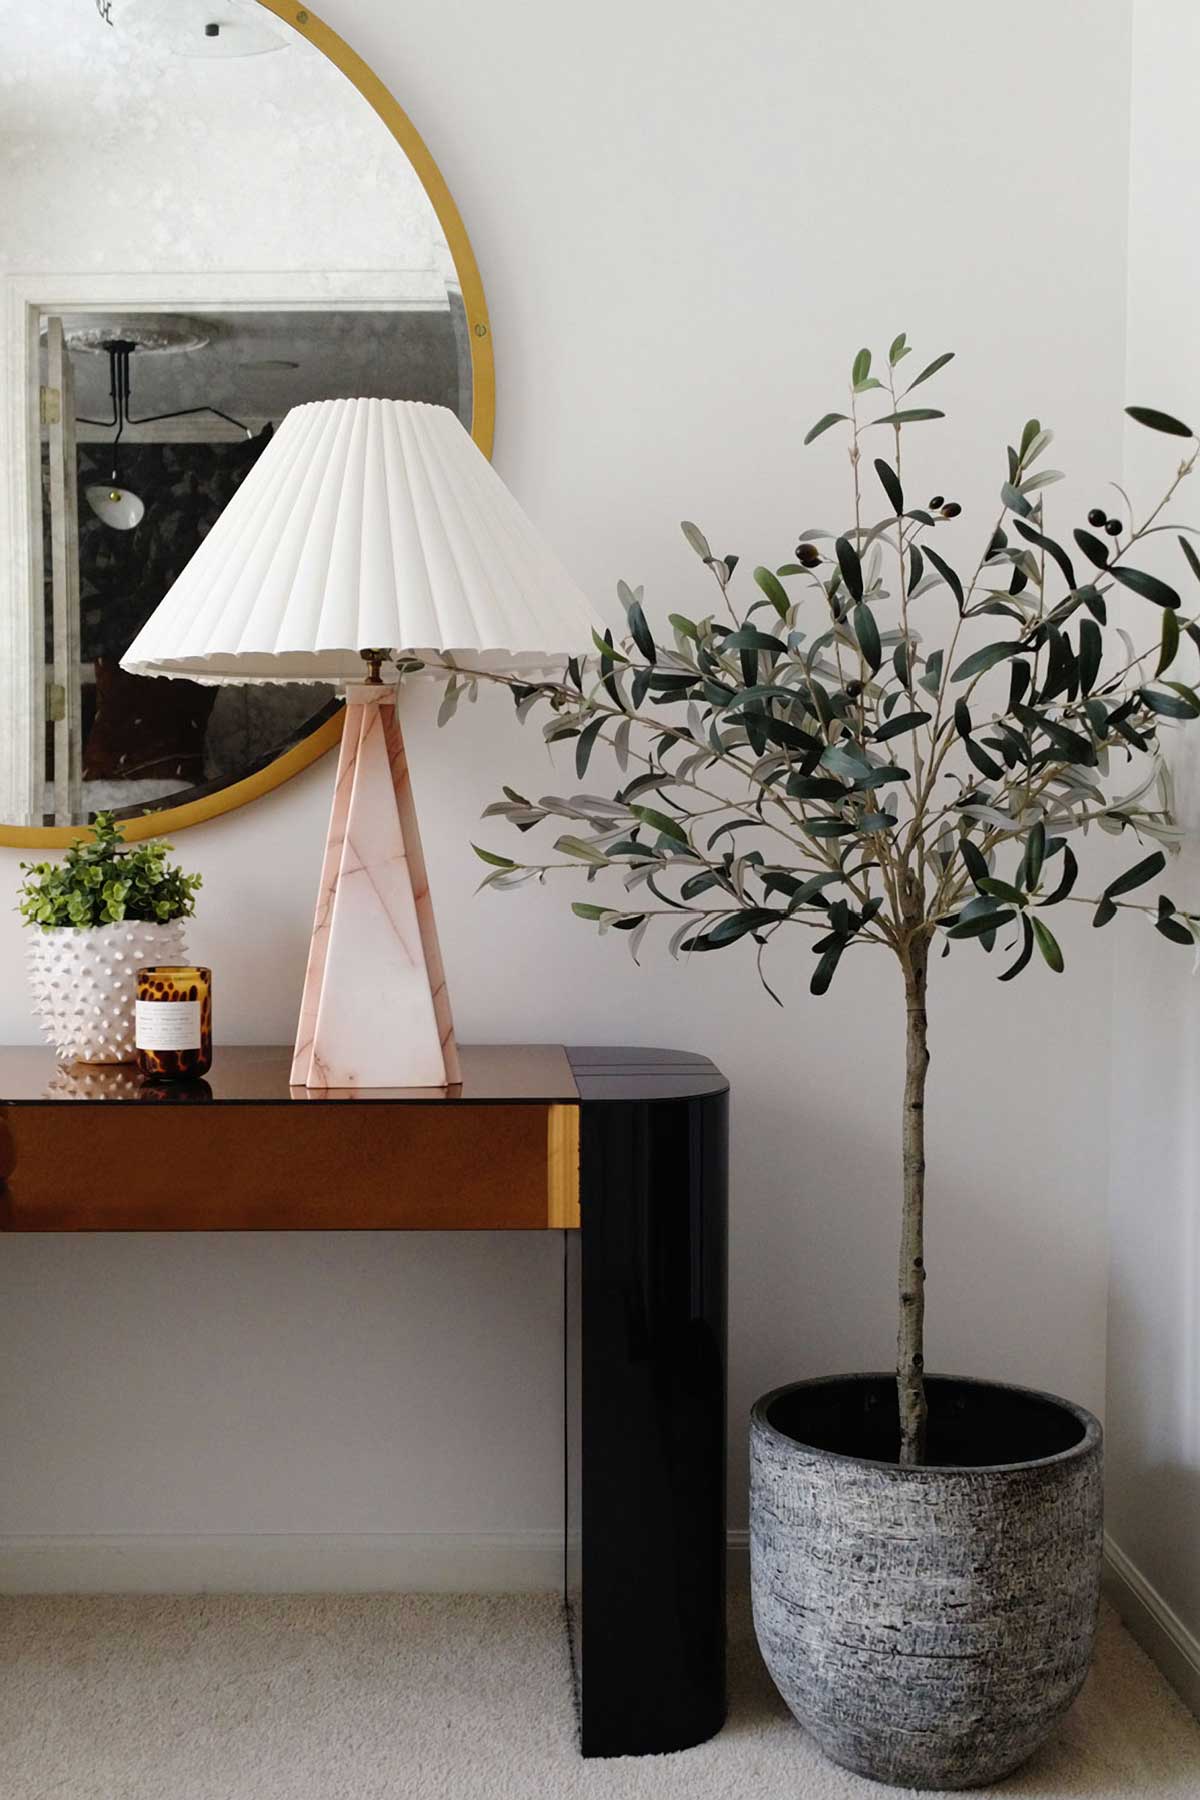 Best Faux Olive Trees 2023 - Get the look of fresh greenery without the maintenance with these stunning faux olive trees. Perfect artificial decor for any room in the house